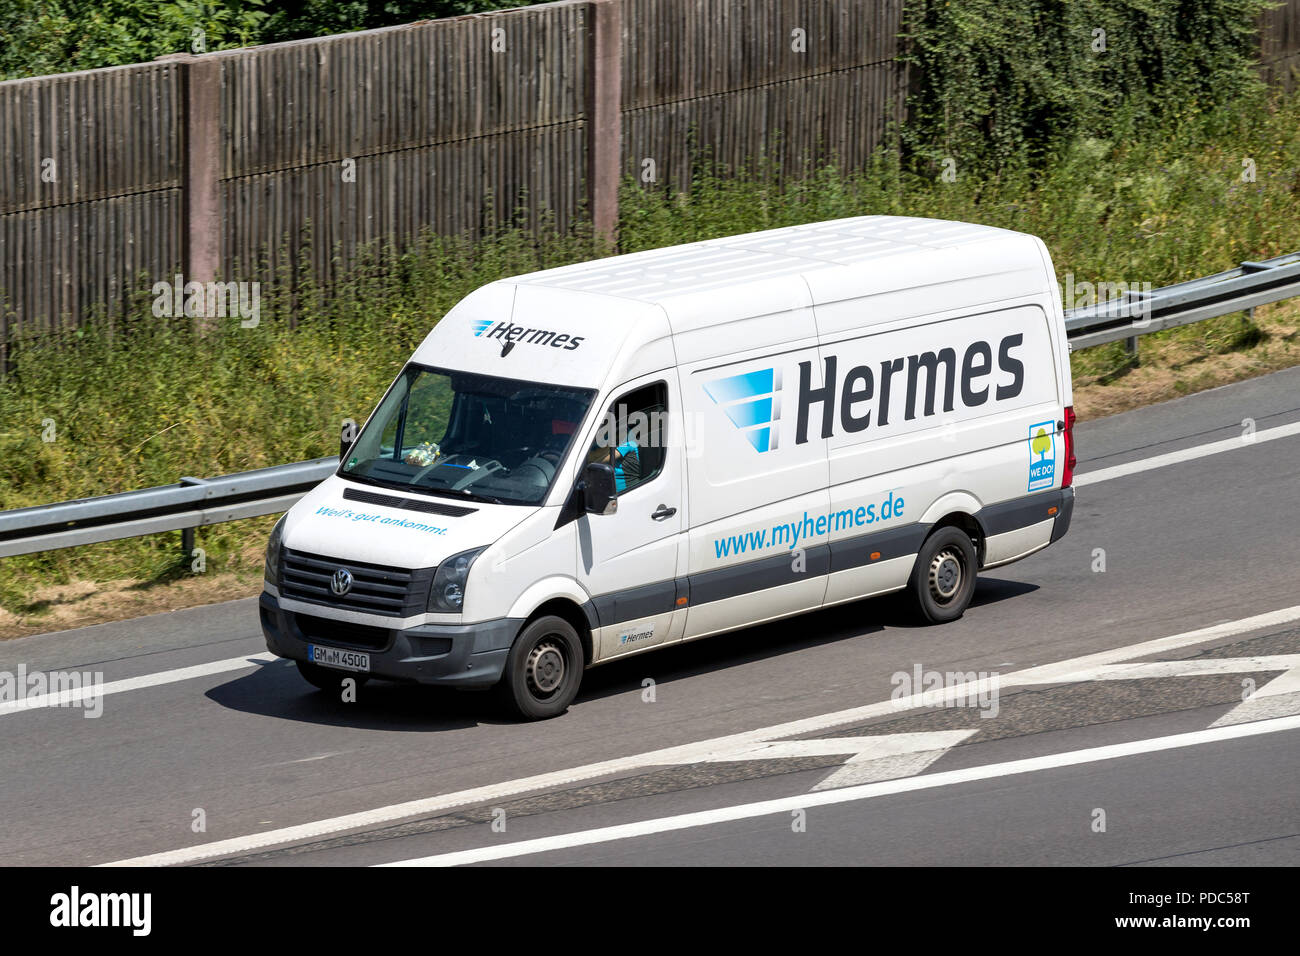 Hermes delivery van on motorway. Hermes is Germany’s largest post-independent provider of deliveries to private customers. Stock Photo